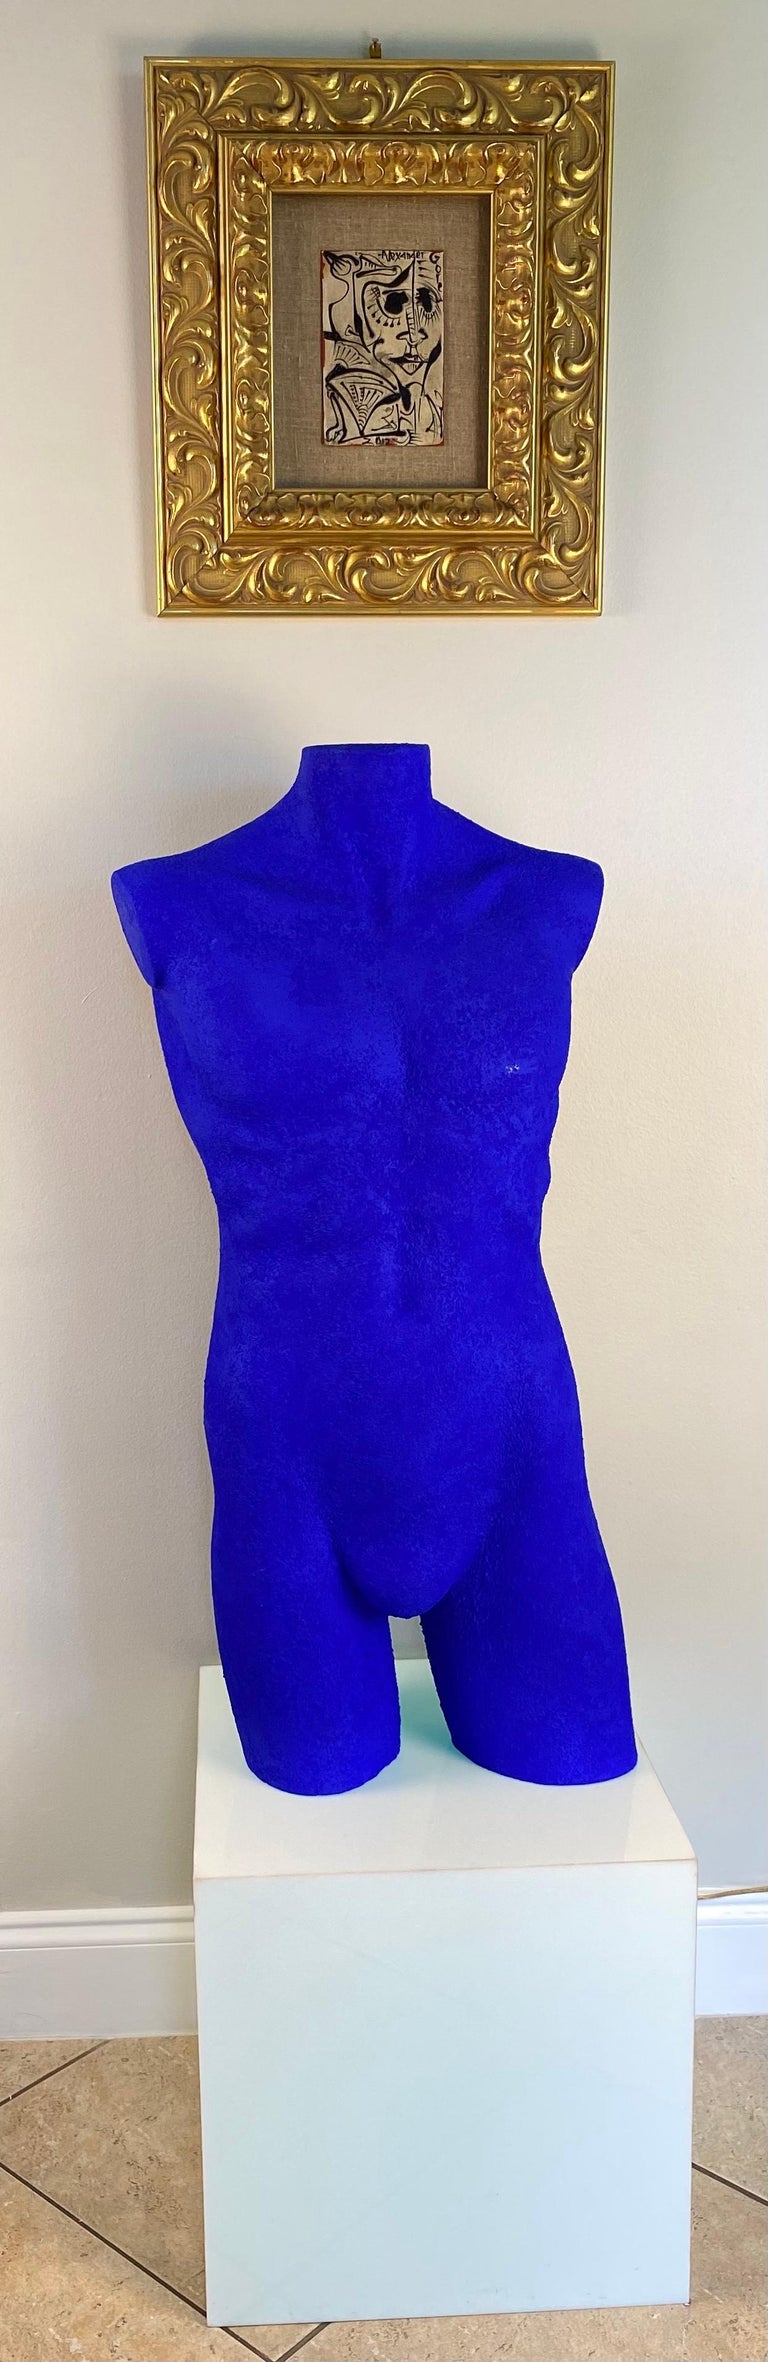 https://a.1stdibscdn.com/male-nude-torso-blue-man-sculpture-in-the-manner-of-yves-klein-for-sale-picture-4/f_40821/f_302364921663265586663/blue_man_in_situ_master.jpg?width=768